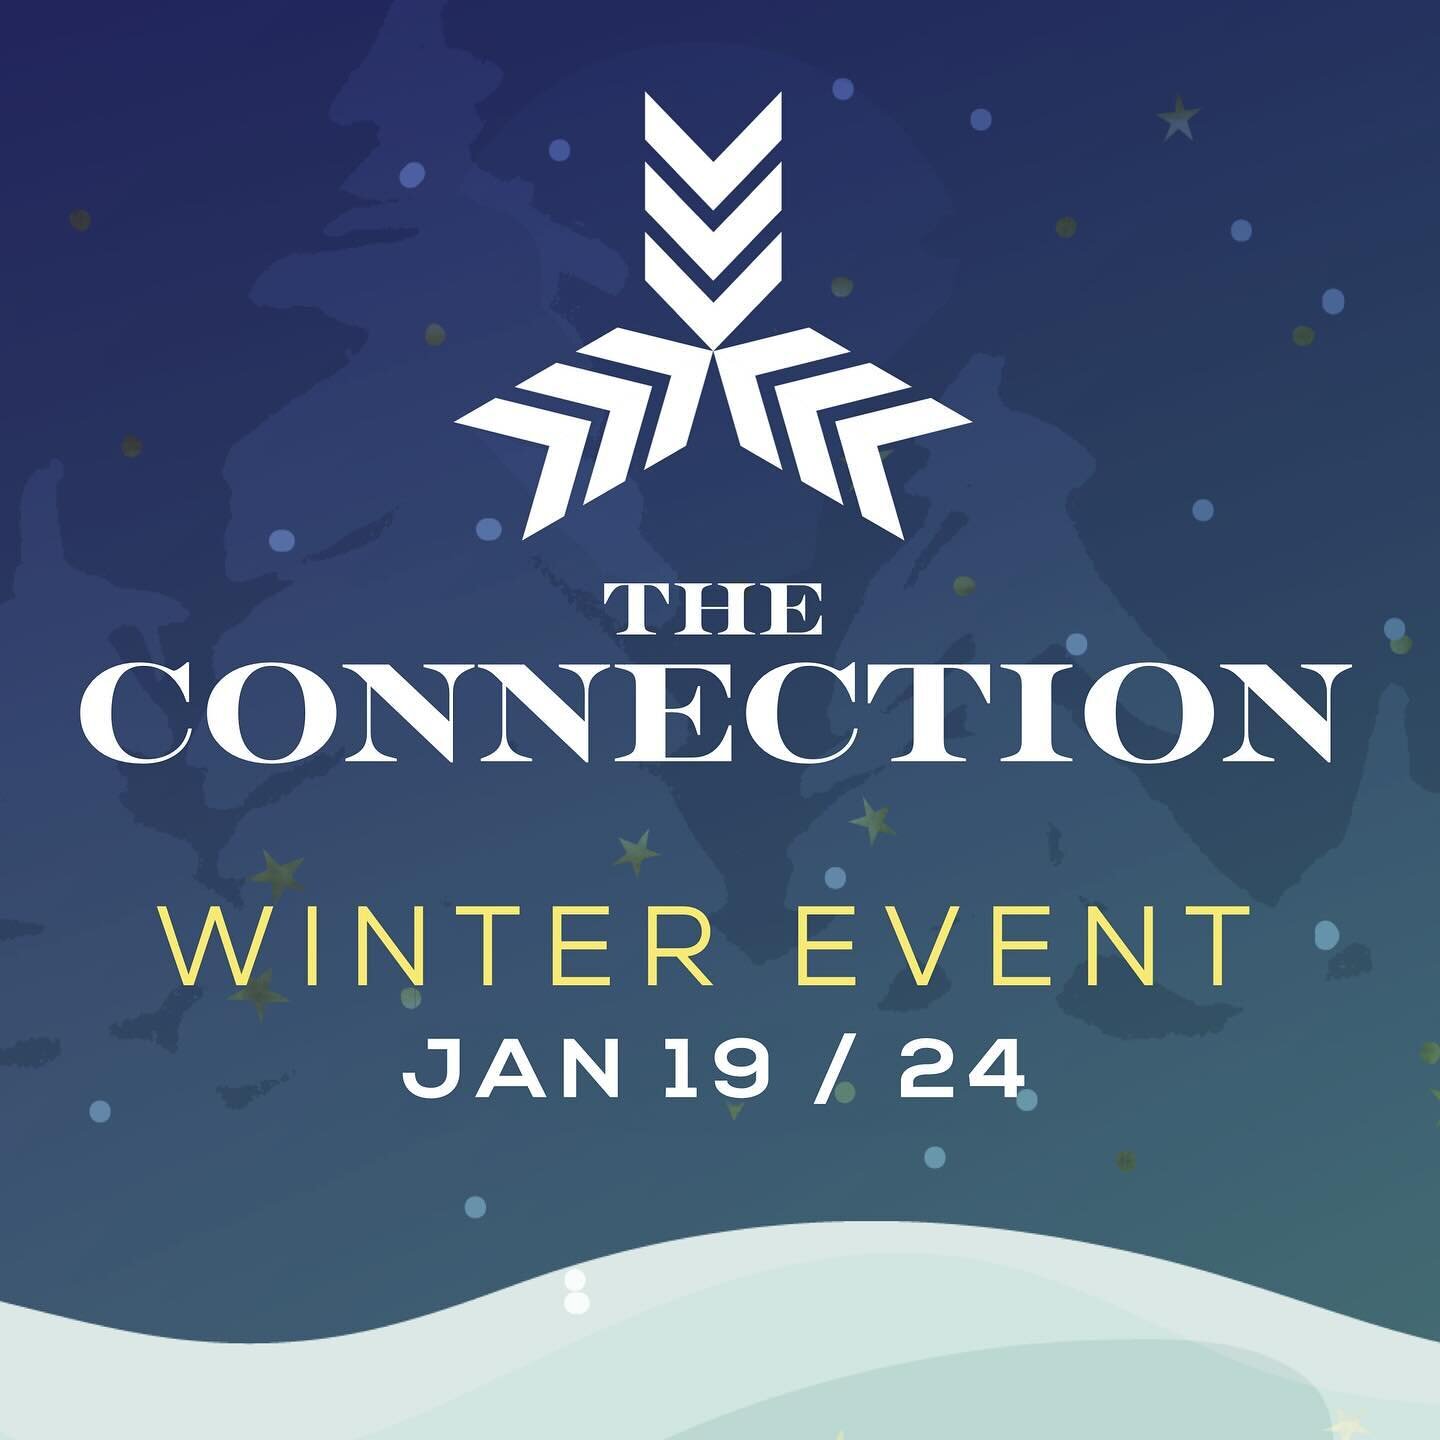 ❄️THE WINTER EVENT❄️ // Come hang out NEXT FRIDAY for our annual Winter Event! This is an event to highlight two of our awesome partner ministries @campkadesh and @calbreak. This night will be full of games, hearing about these ministries, and lots o